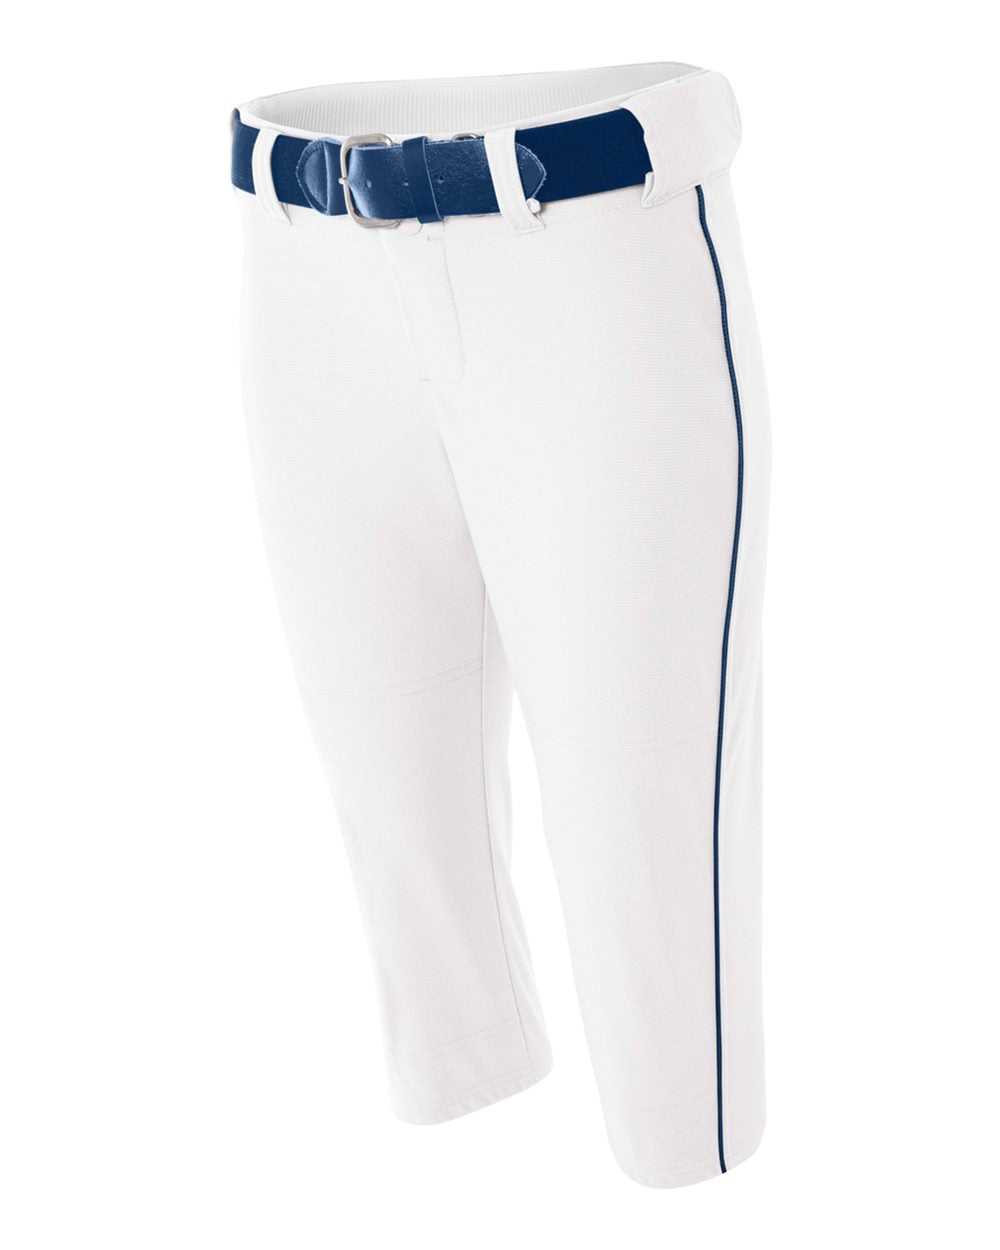 A4 NW6188 Womens Softball Pant with Cording - White Navy - HIT a Double